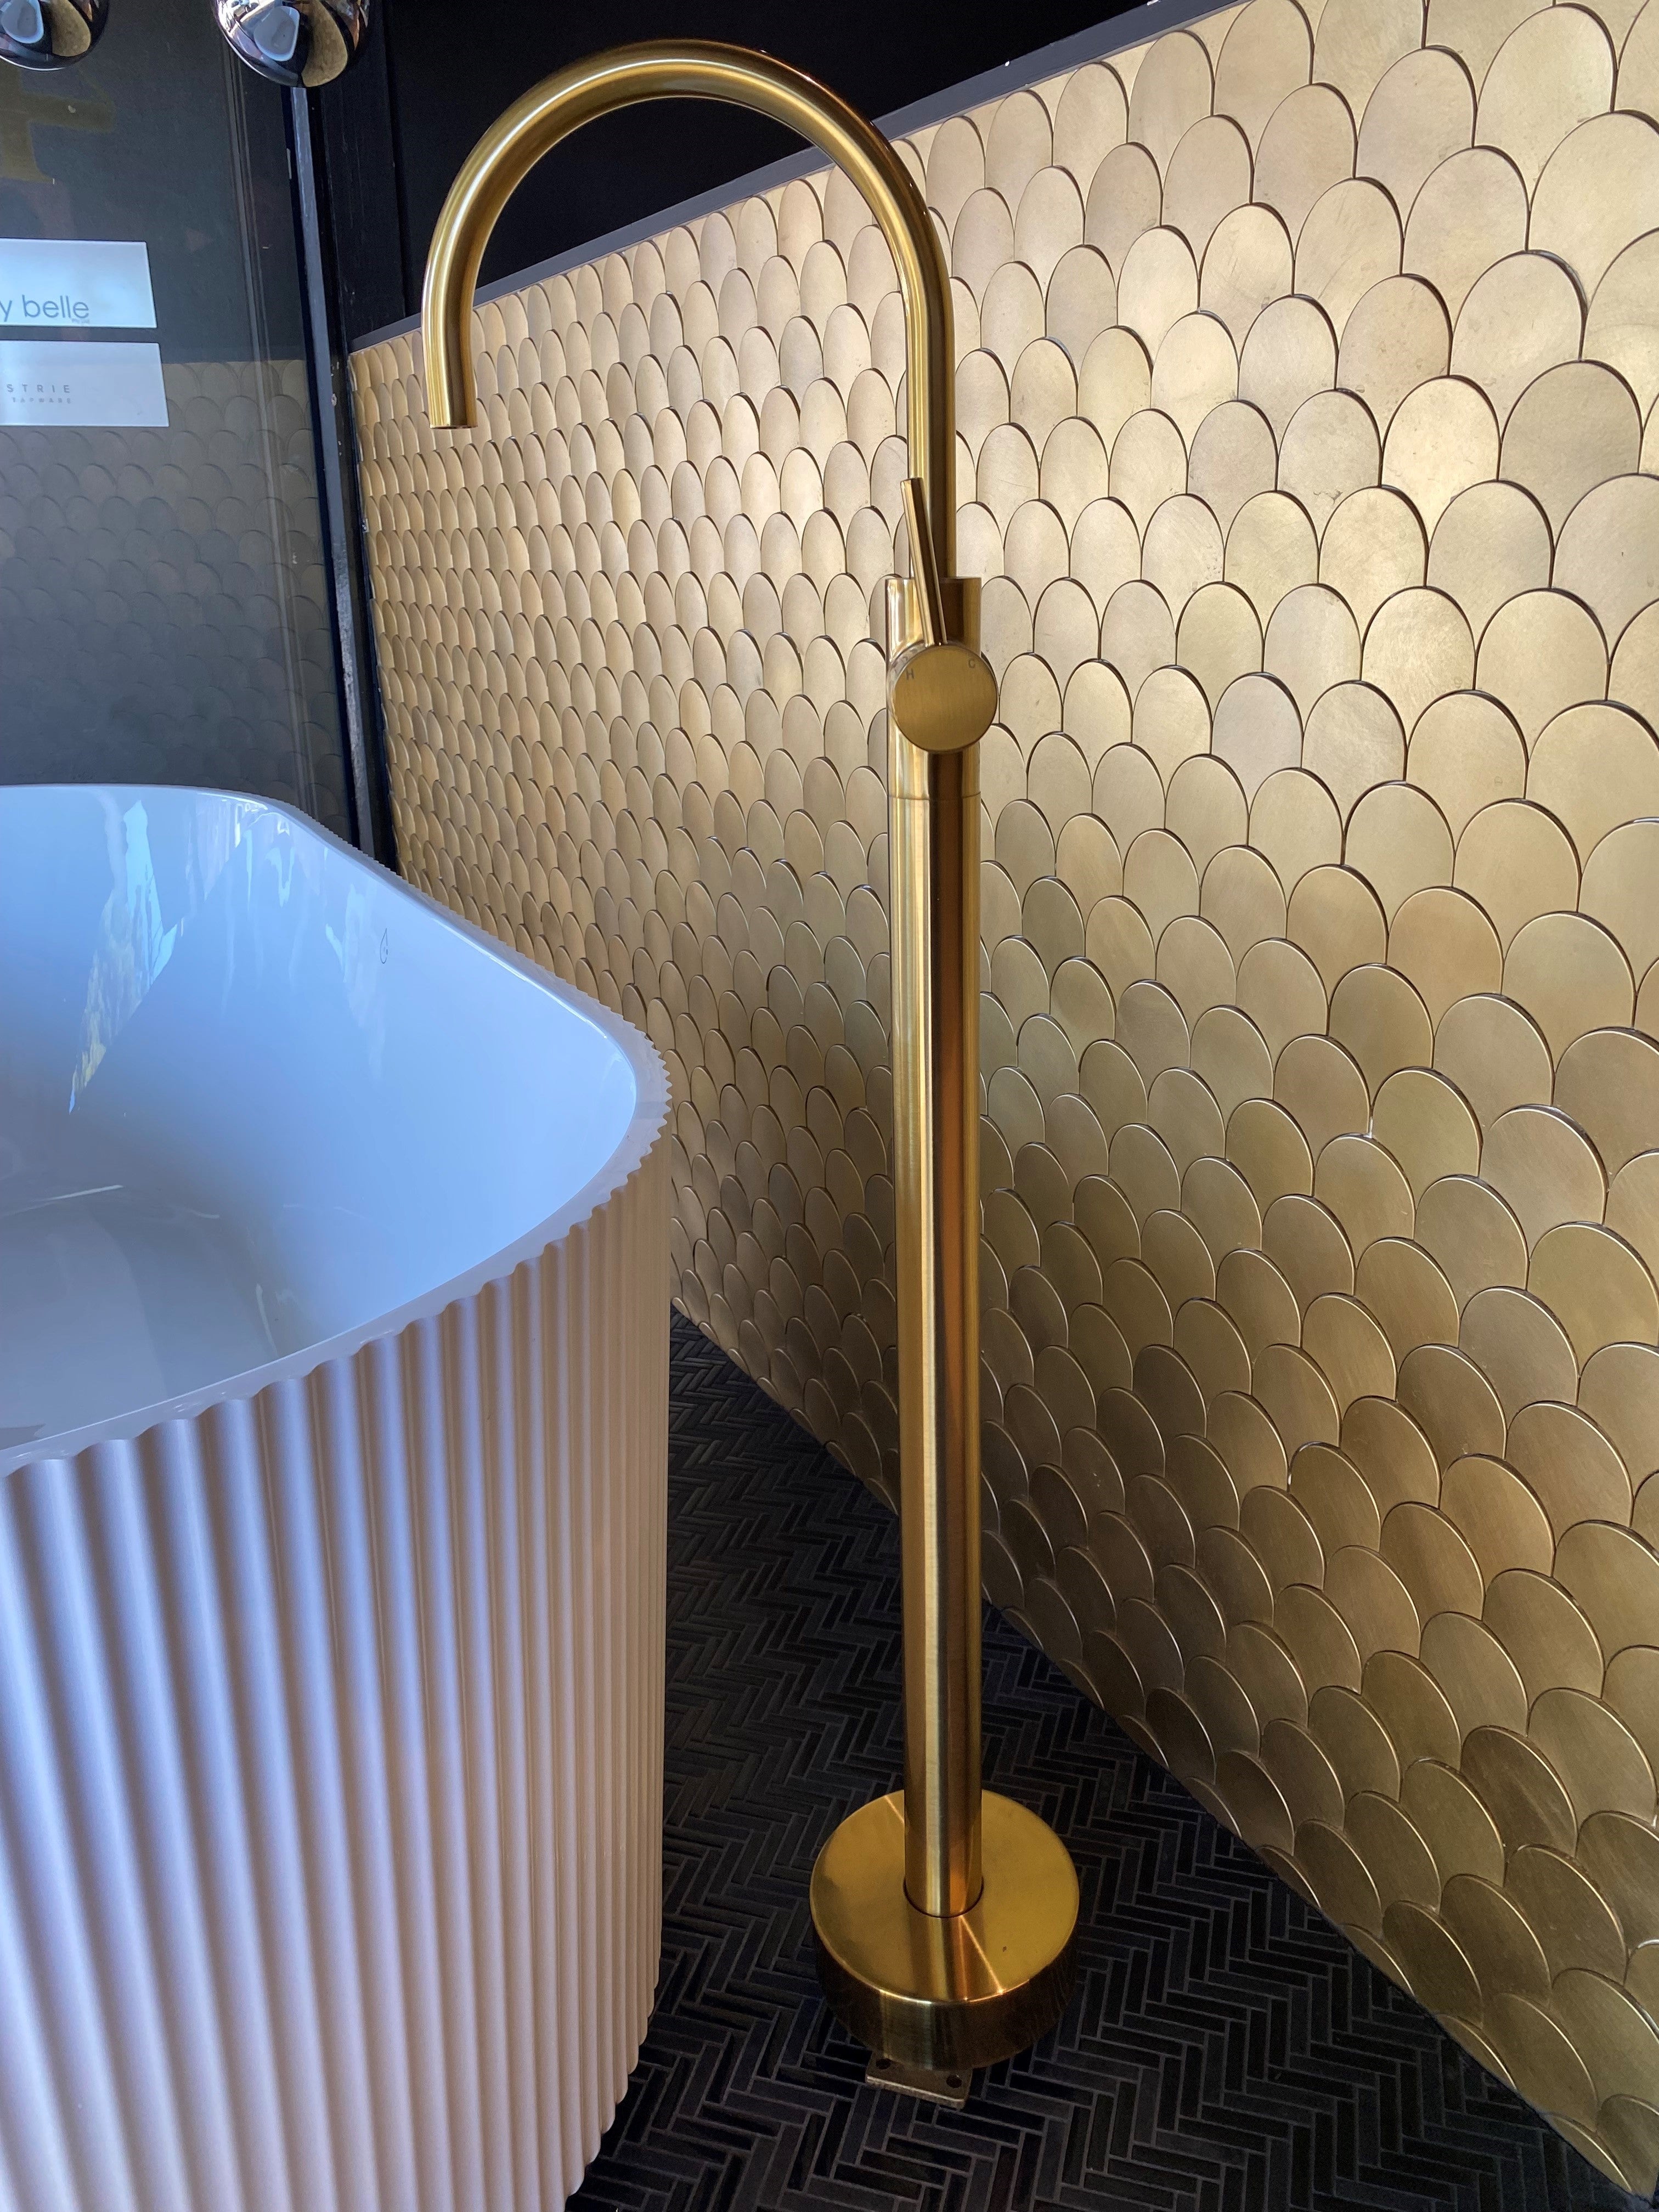 Ex-Display Bondi Floor-Mounted Bath Spout with Mixer in Gold